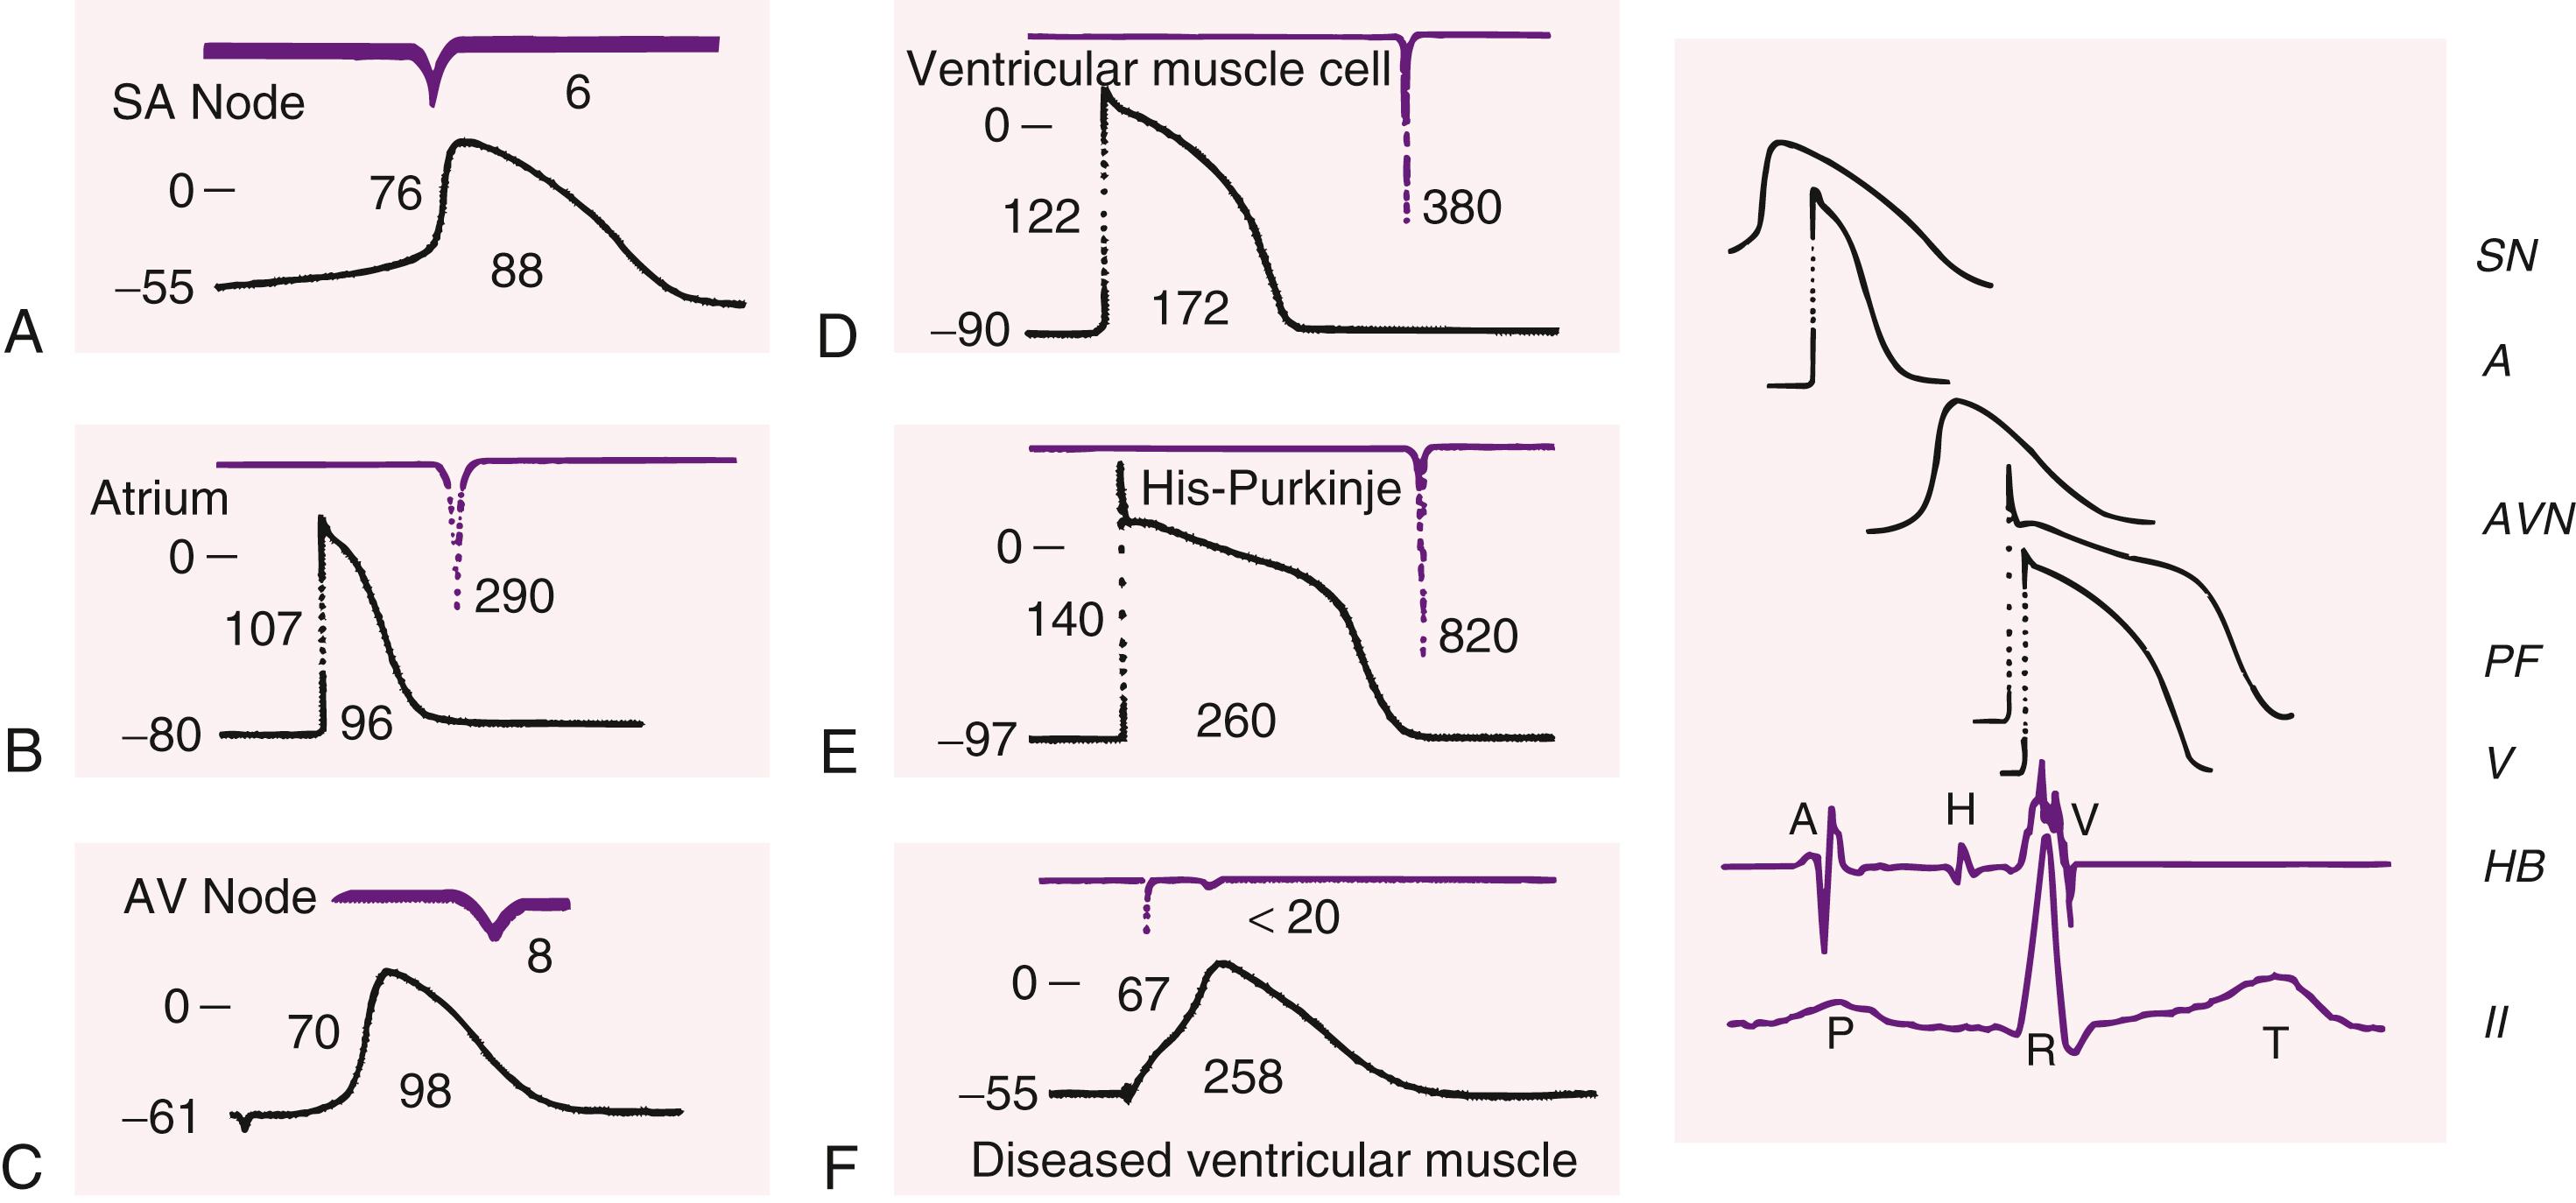 FIGURE 62.5, Action potentials recorded from different tissues in the heart (left) remounted along with a His bundle recording and scalar electrocardiogram from a patient (right) to illustrate the timing during a single cardiac cycle. A to F, Top tracing is dV/dt of phase 0, and the second tracing is the action potential. For each panel, the numbers (from left to right ) indicate maximum diastolic potential (mV), action potential amplitude (mV), action potential duration at 90% of repolarization (milliseconds), and rate of depolarization of phase 0 (V/sec). Zero potential is indicated by the short horizontal line next to the zero on the upper left of each action potential. A, Rabbit sinoatrial node. B, Canine atrial muscle. C, Rabbit AV node. D, Canine ventricular muscle. E, Canine Purkinje fiber. F, Diseased human ventricle. Note that the action potentials recorded in A, C, and F have reduced resting membrane potentials and amplitudes relative to the other action potentials. In the right panel, A, Atrial muscle potential; AVN, atrioventricular nodal potential; HB, His bundle recording; II, lead II; PF, Purkinje fiber potential; SN, sinus nodal potential; V, ventricular muscle potential. Horizontal calibration on the left: 50 milliseconds for A and C, 100 milliseconds for B, D, E, and F; 200 milliseconds on the right. Vertical calibration on the left: 50 mV; horizontal calibration on the right: 200 milliseconds.